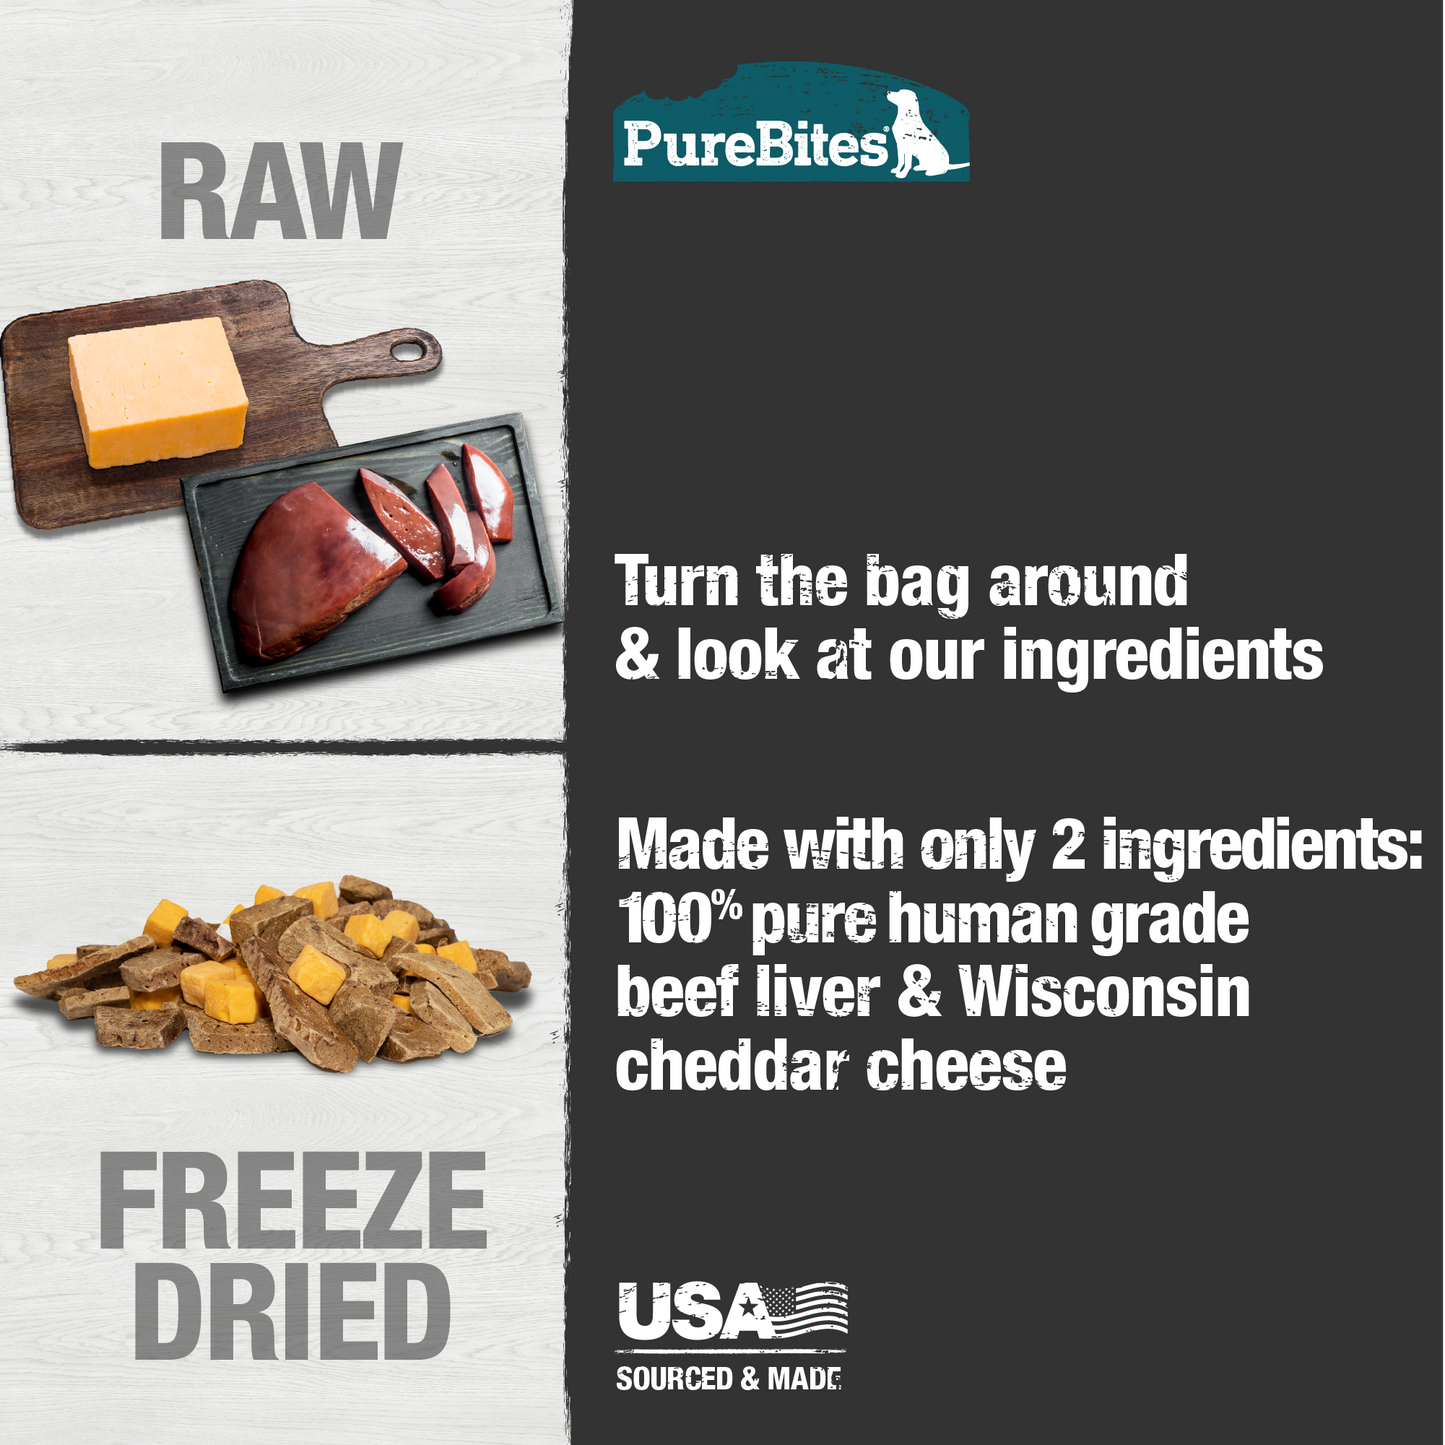 Made with only 2 Ingredients you can read, pronounce, and trust: USA sourced human grade beef liver, cheddar cheese.